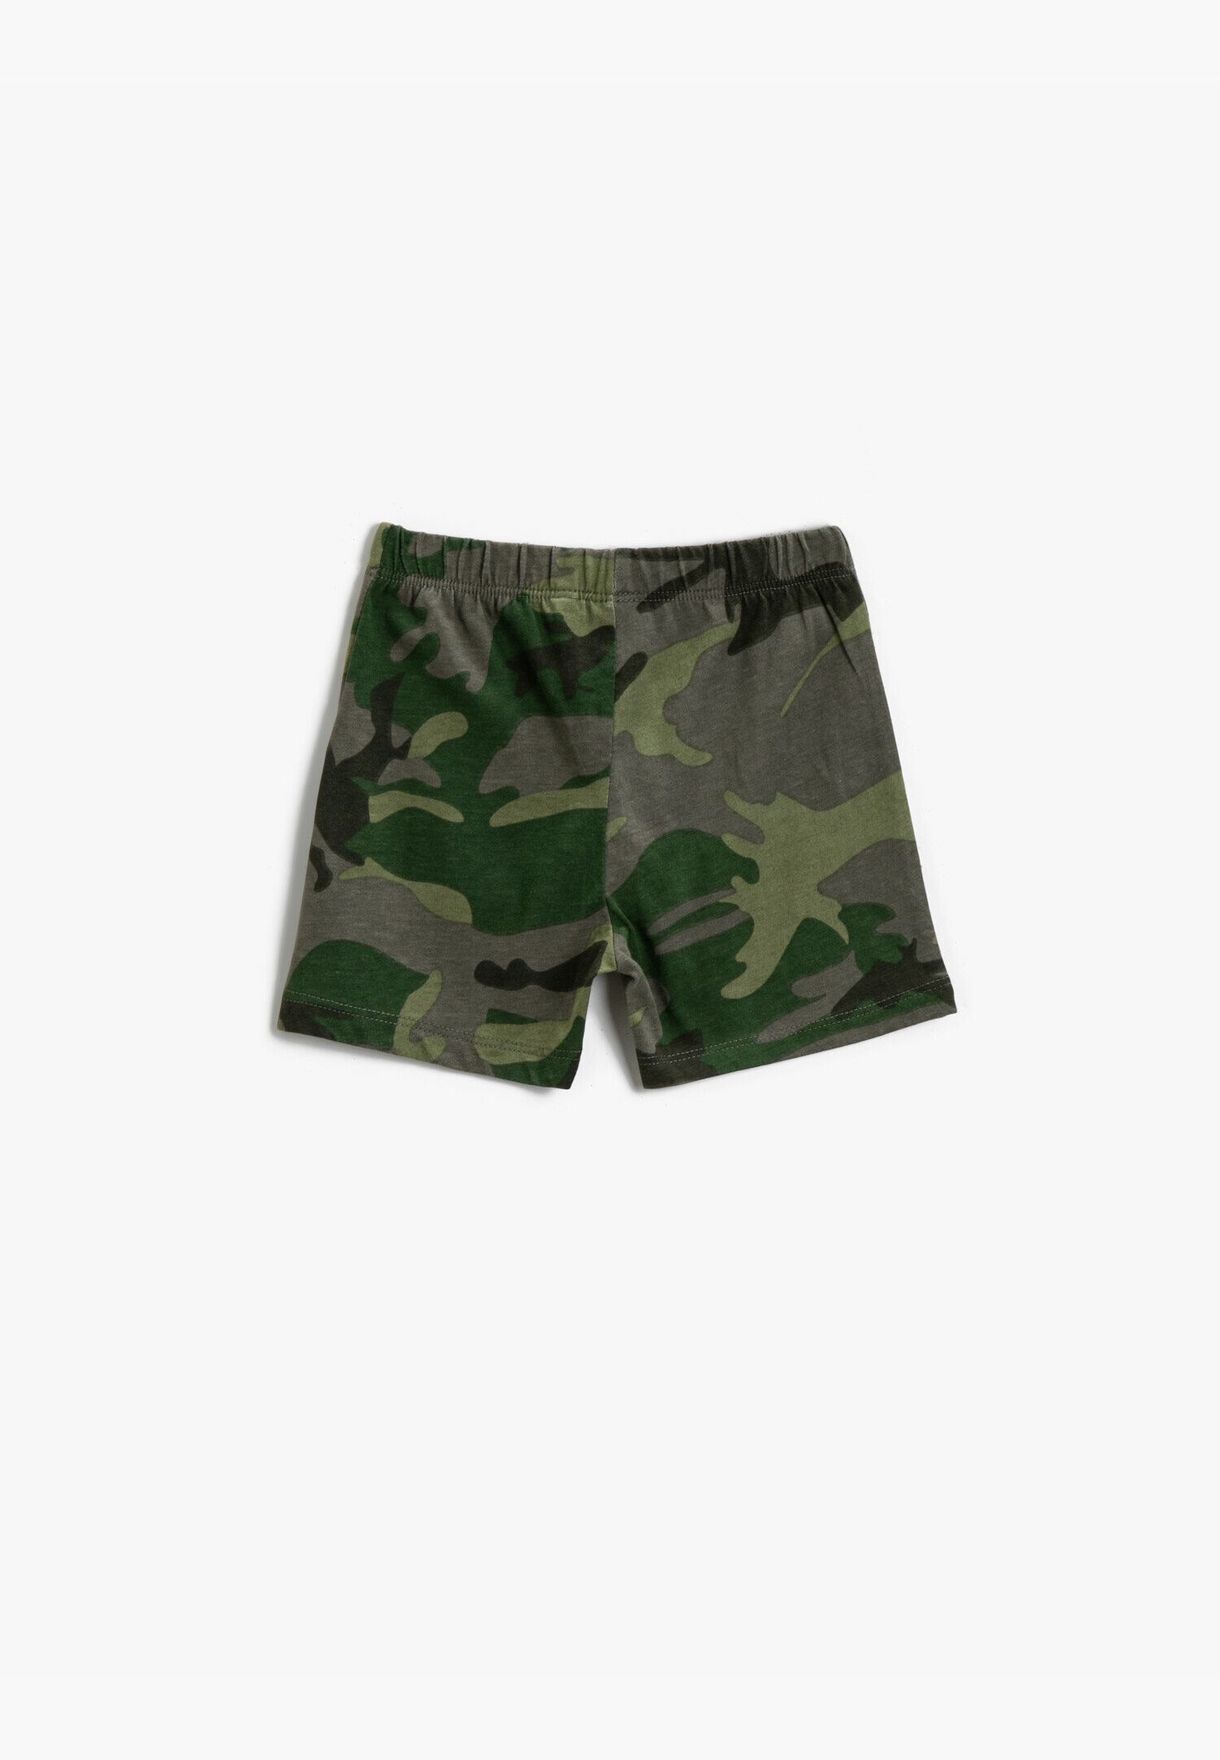 Camouflage Printed Shorts Cotton